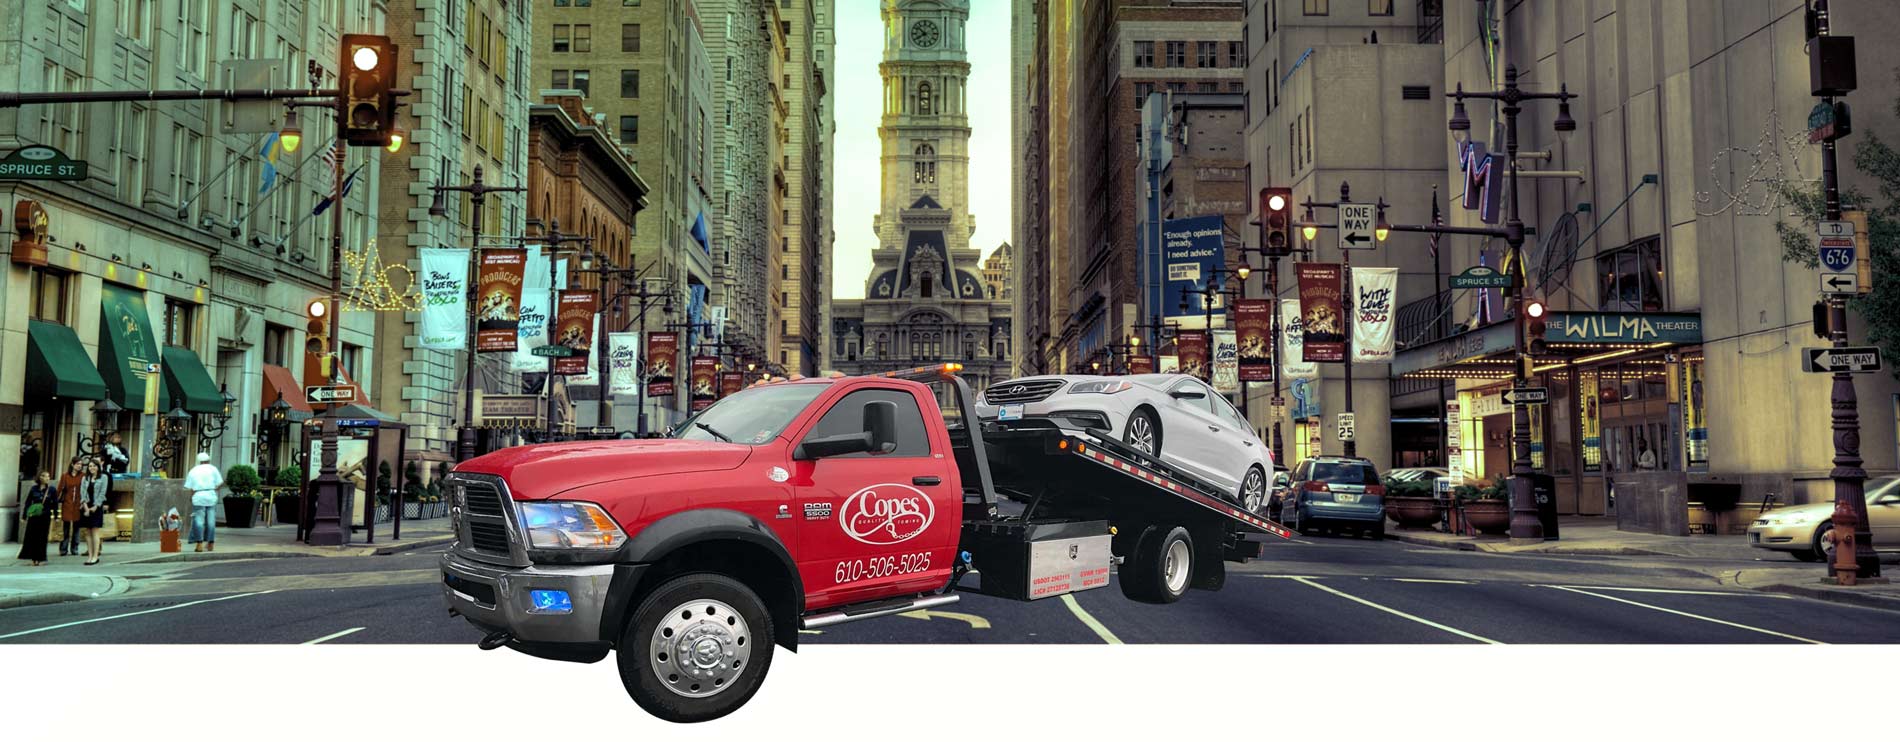 Copes-Quality-Towing-New-Header